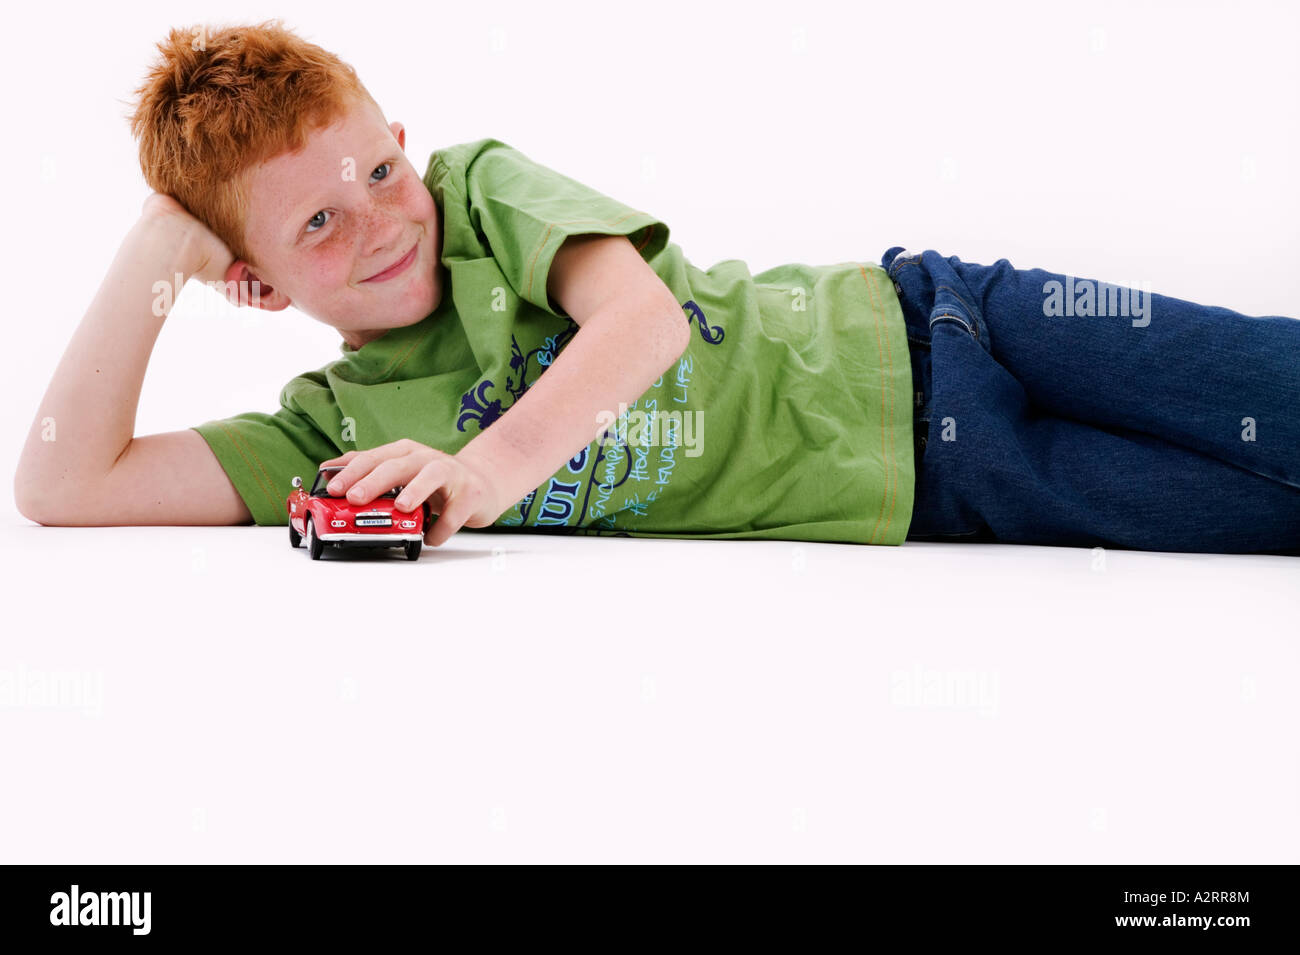 Young boy with red hair and freckles age 7 playing with a toy car Model released Studio shot Stock Photo